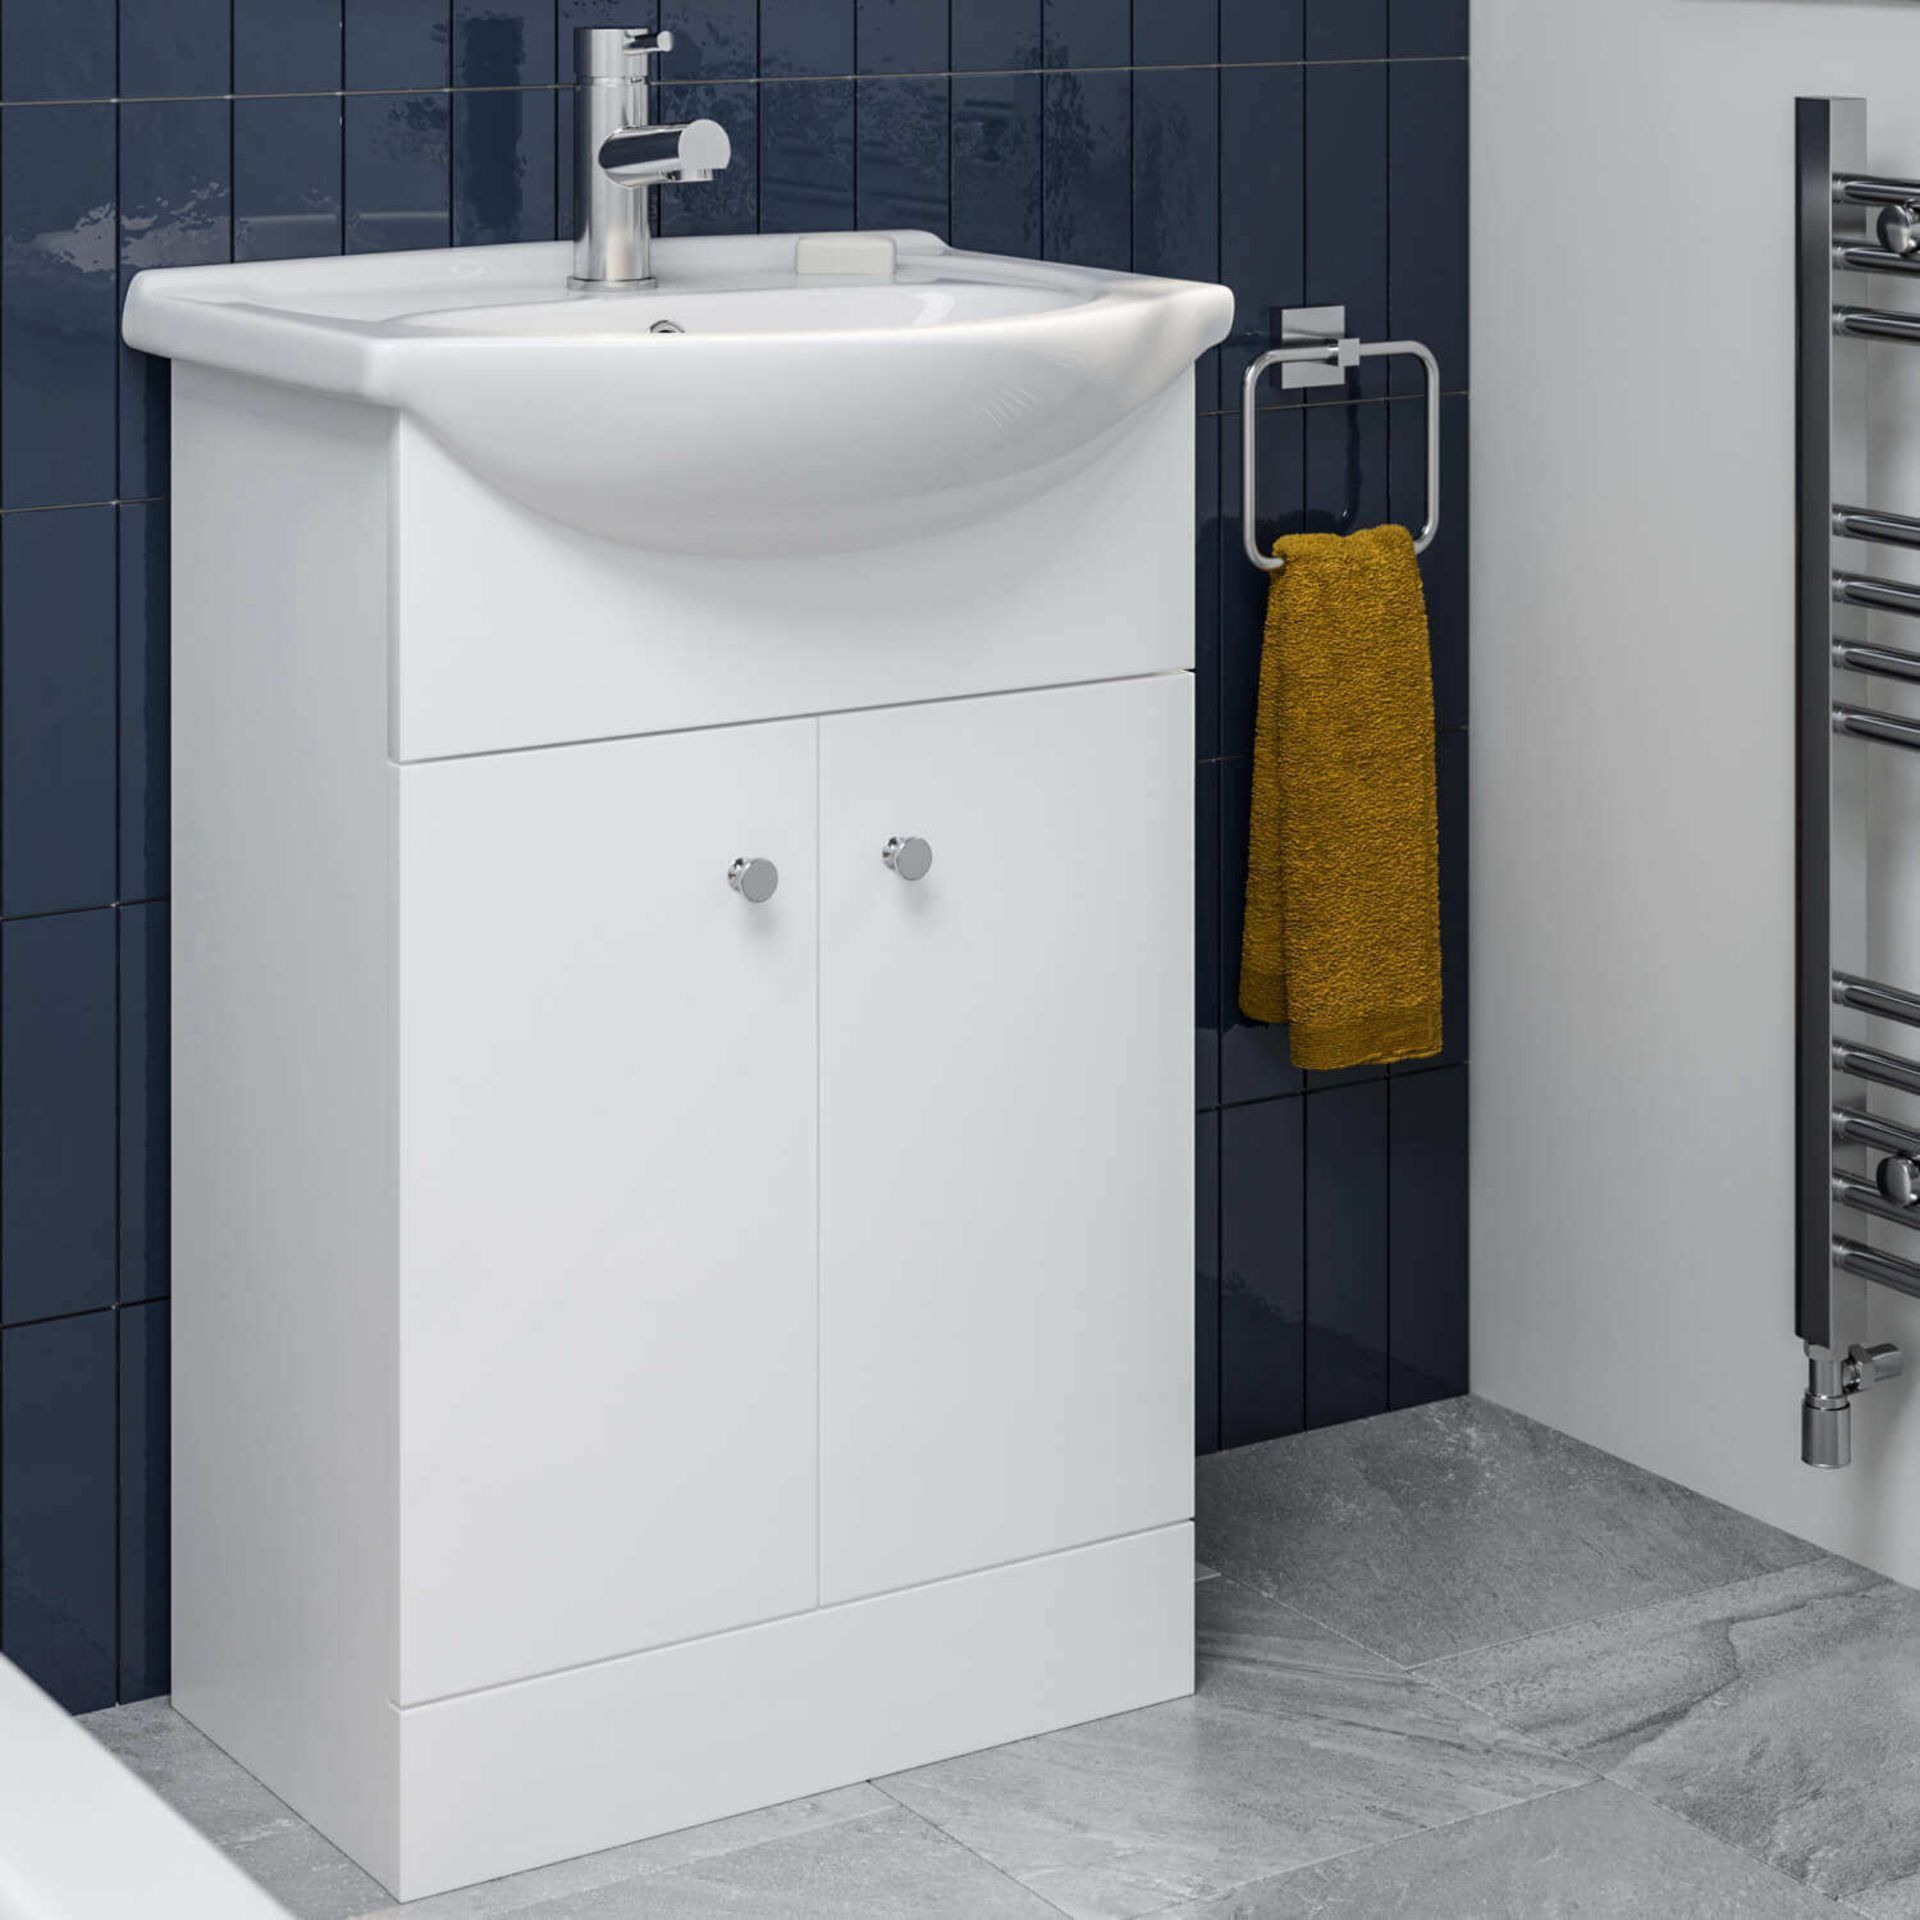 Pallet To Contain 8 x New & Boxed 550mm Quartz Basin Sink Vanity Unit Floor Standing White.Rrp ... - Image 2 of 3